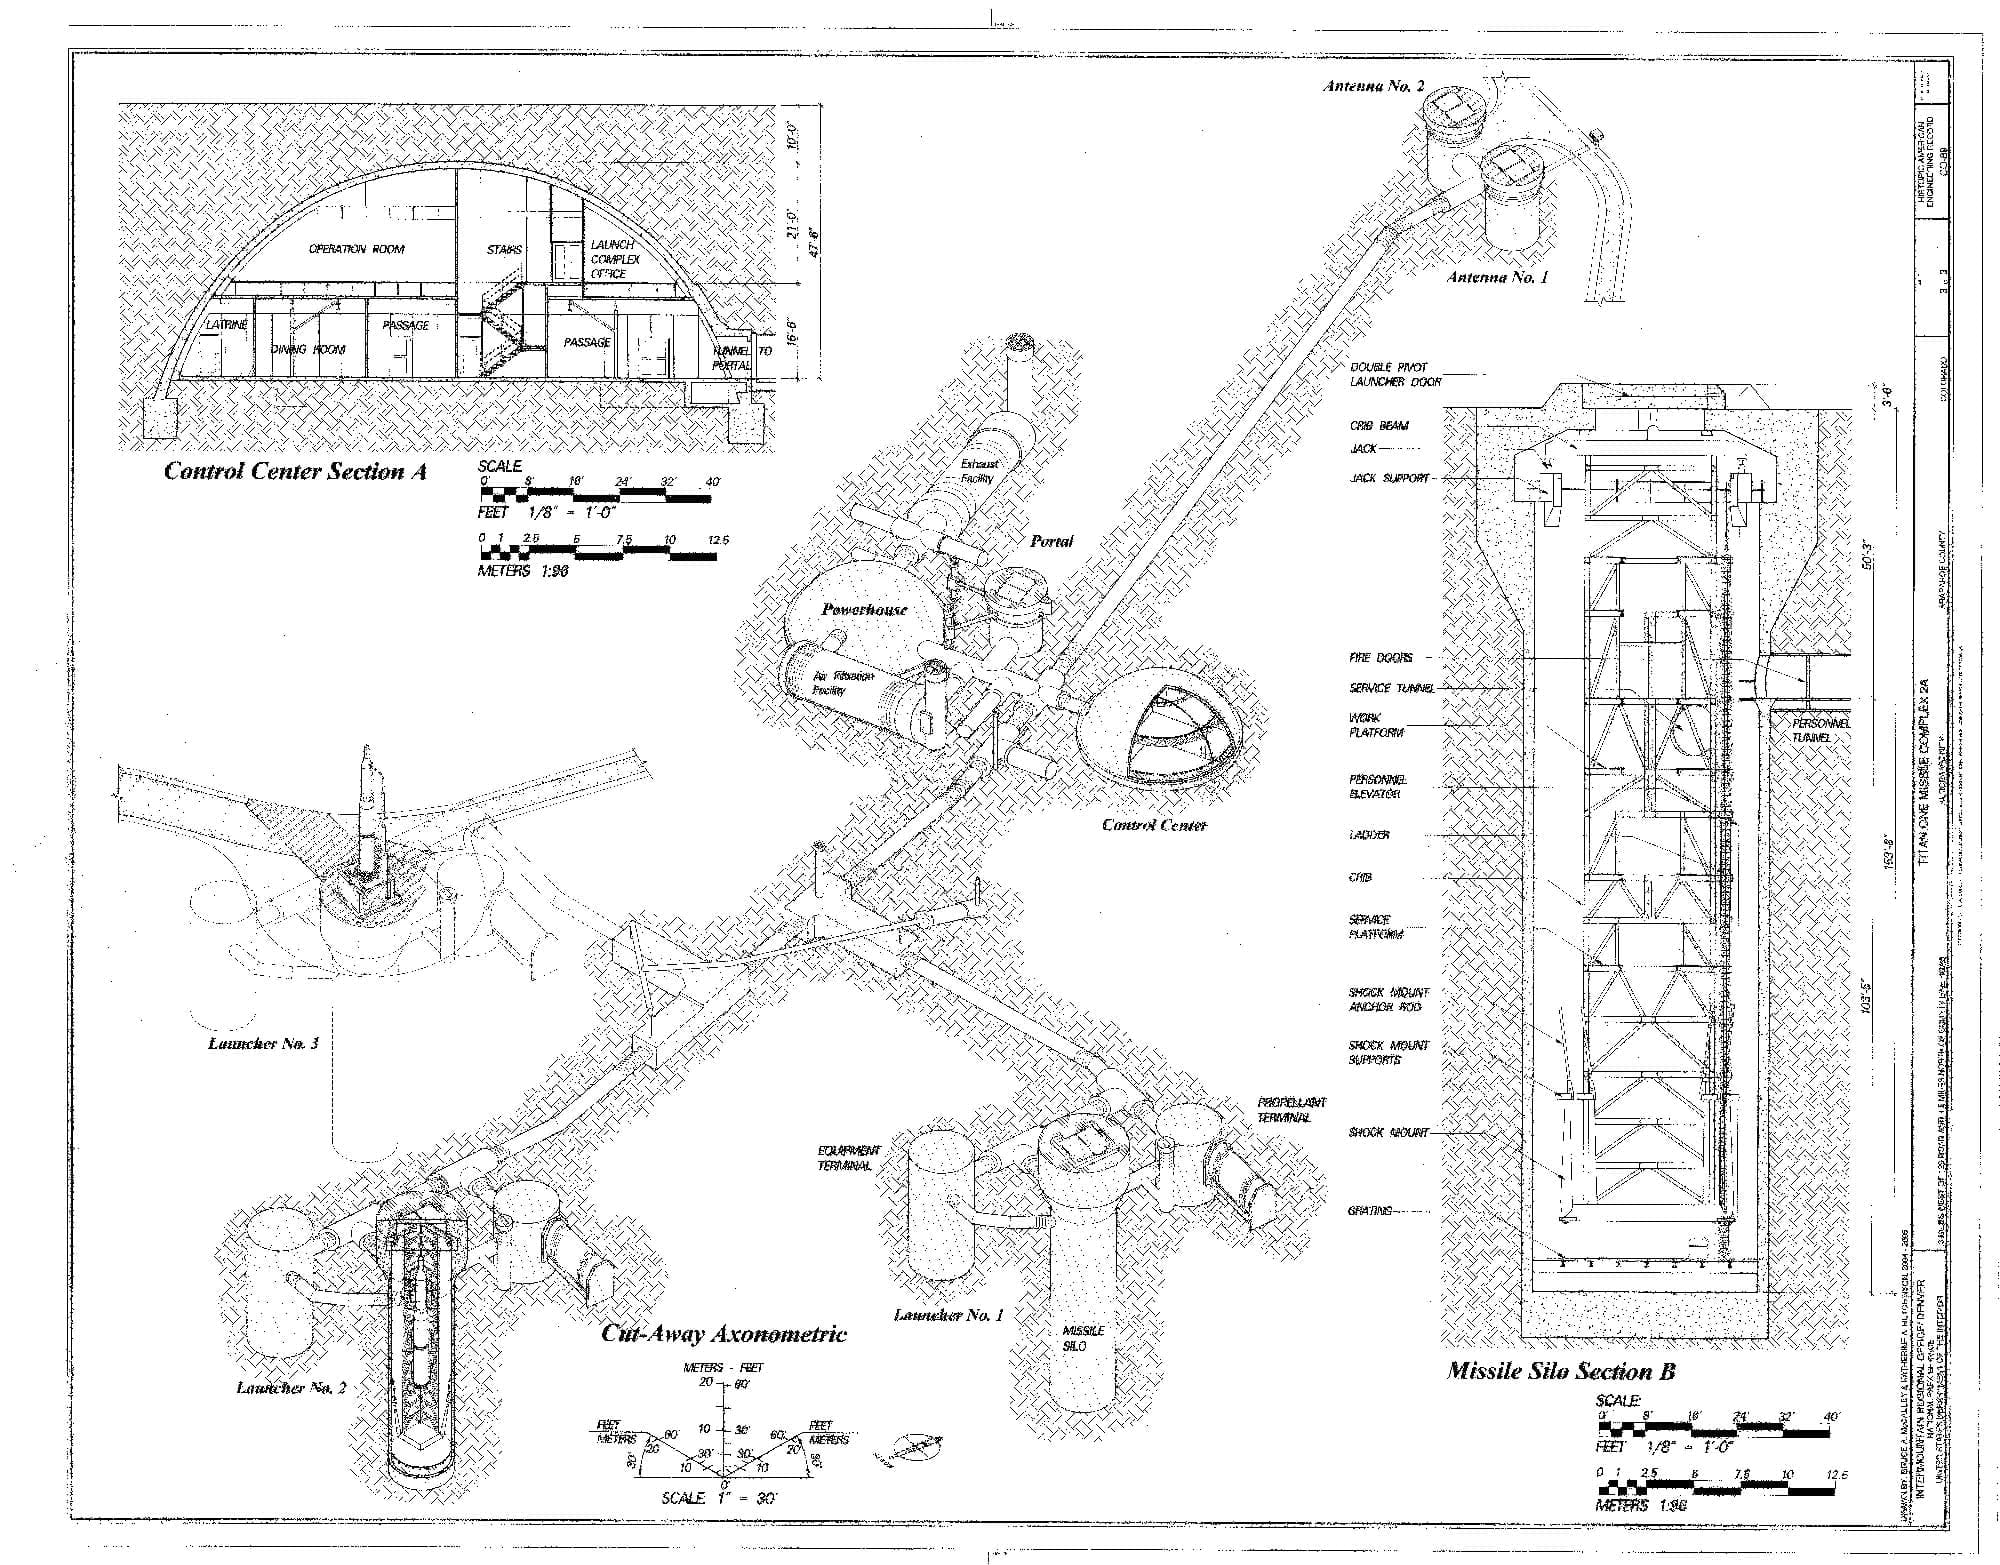 A drawing of a plan for a disney theme park.